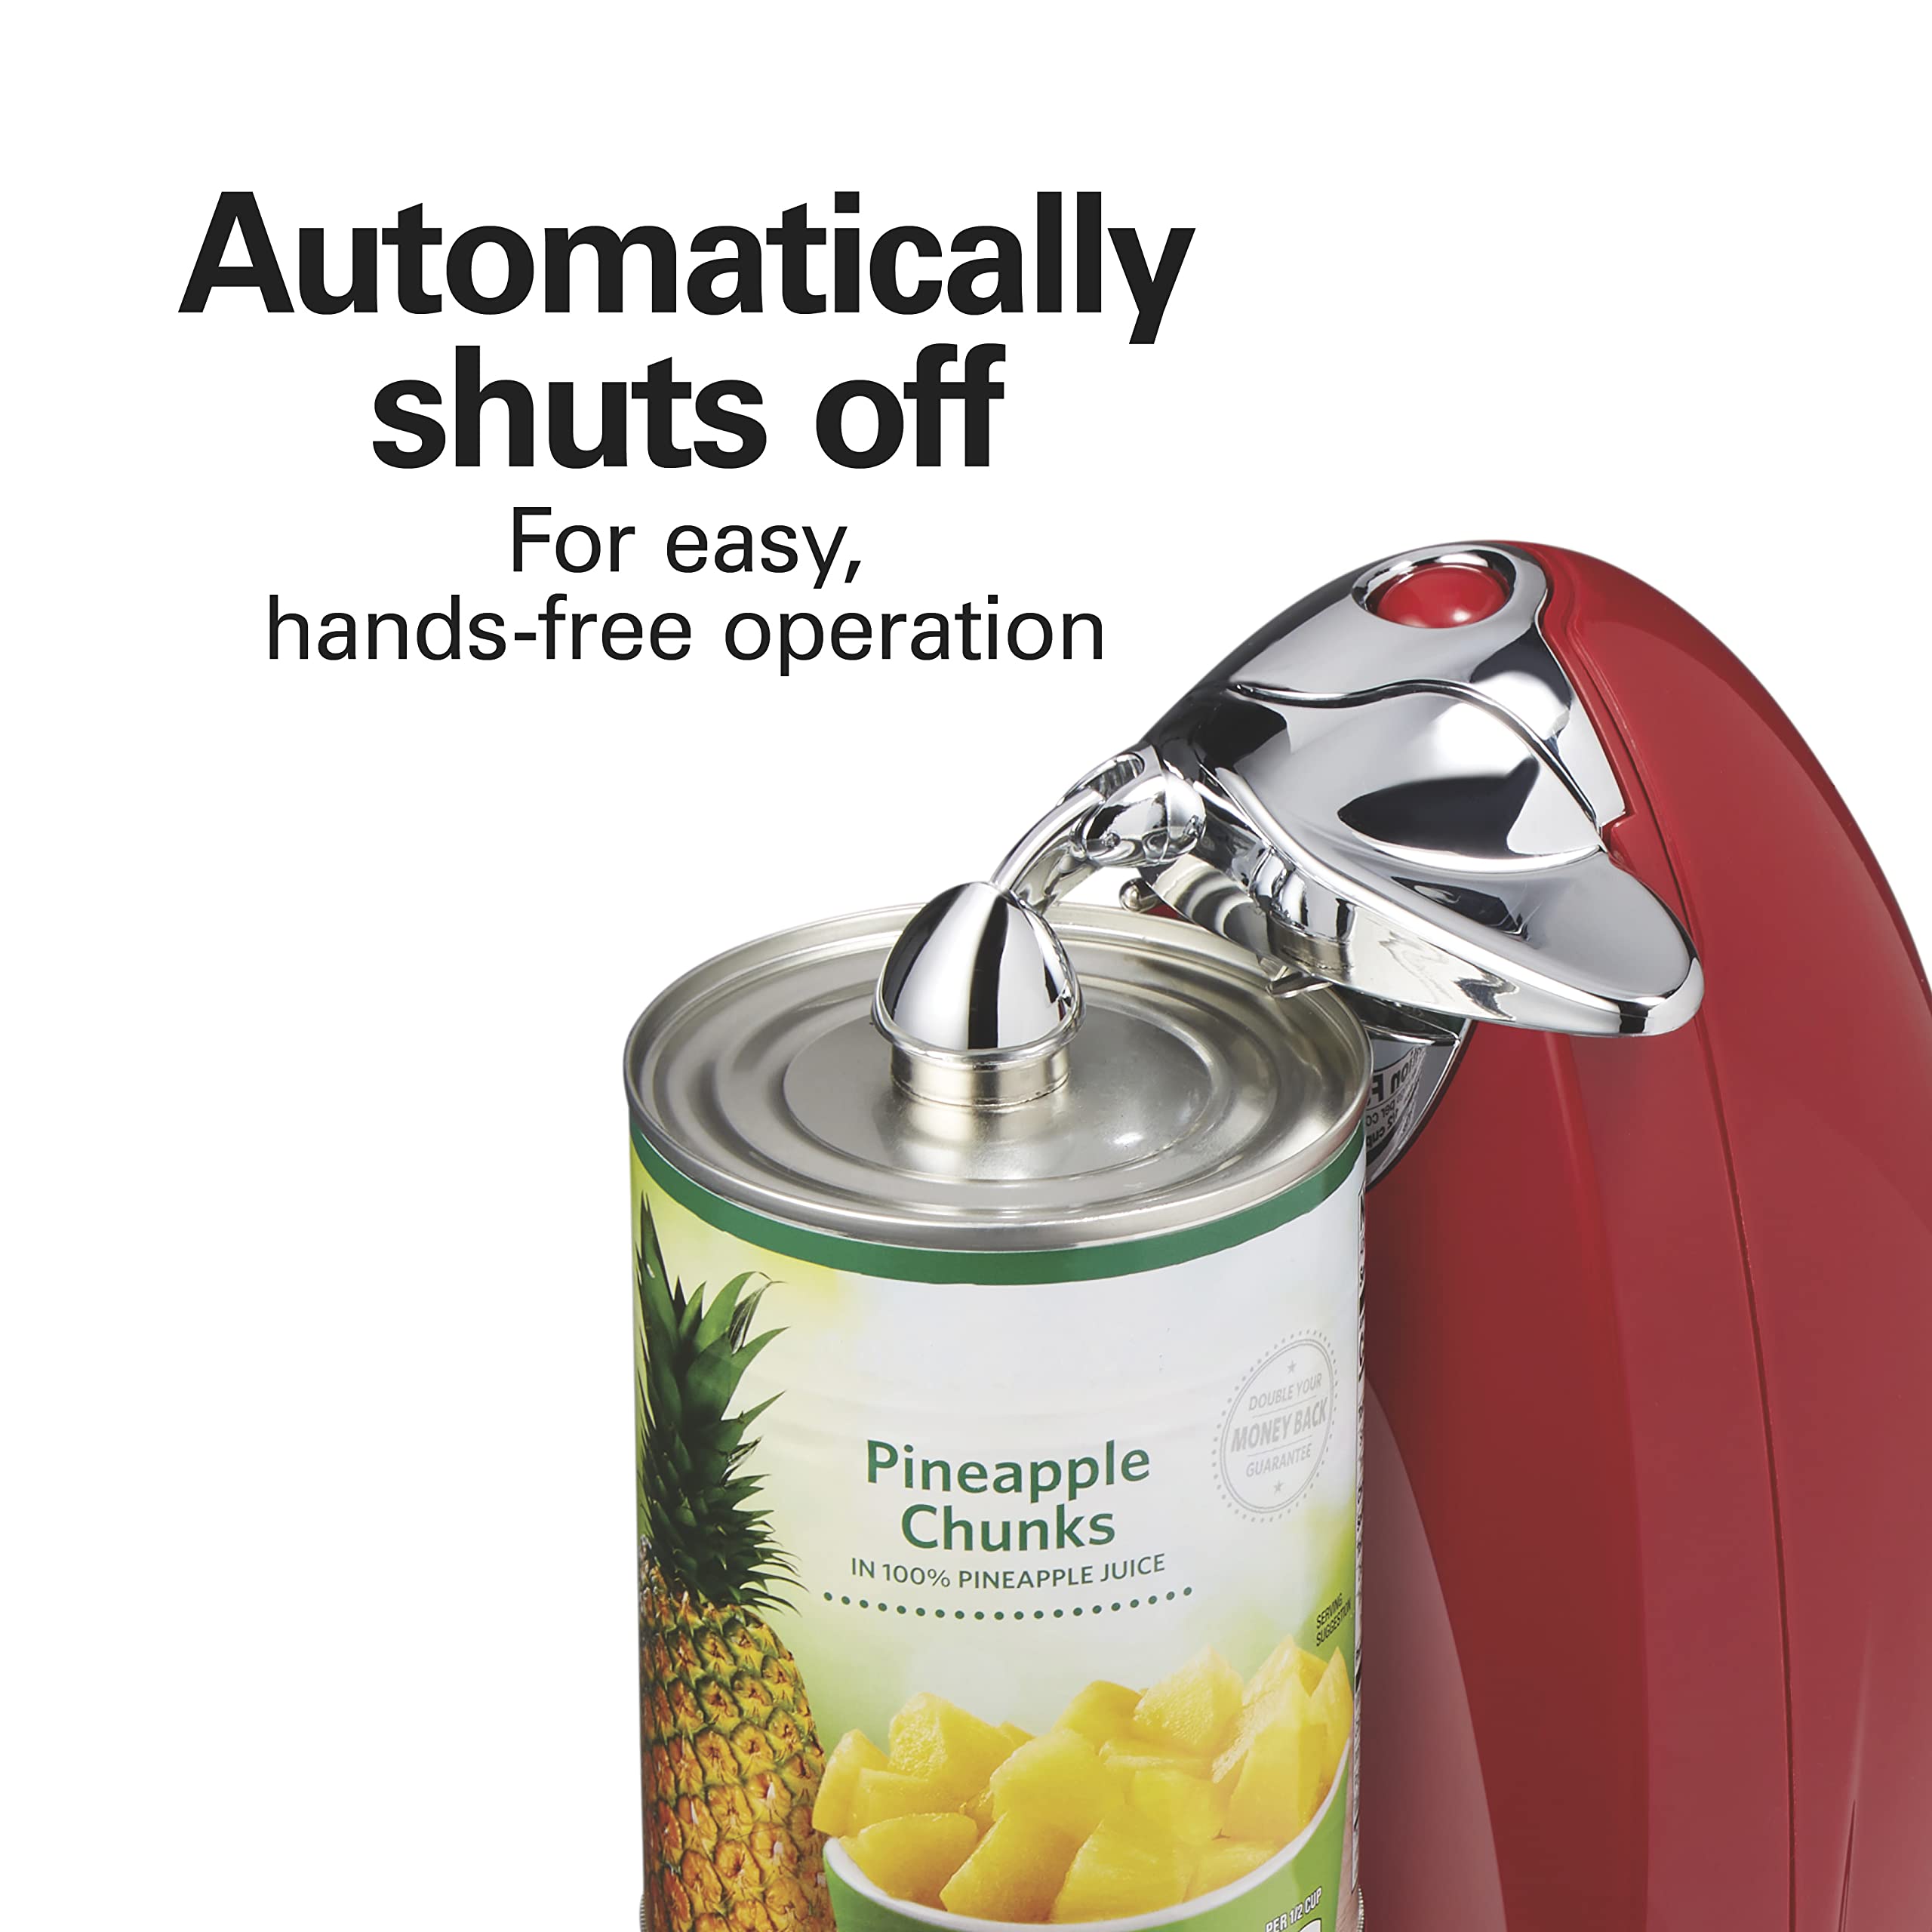 Hamilton Beach Electric Automatic Can Opener with Auto Shutoff, Knife Sharpener, Cord Storage, and SureCut Patented Technology, Extra-Tall, Red